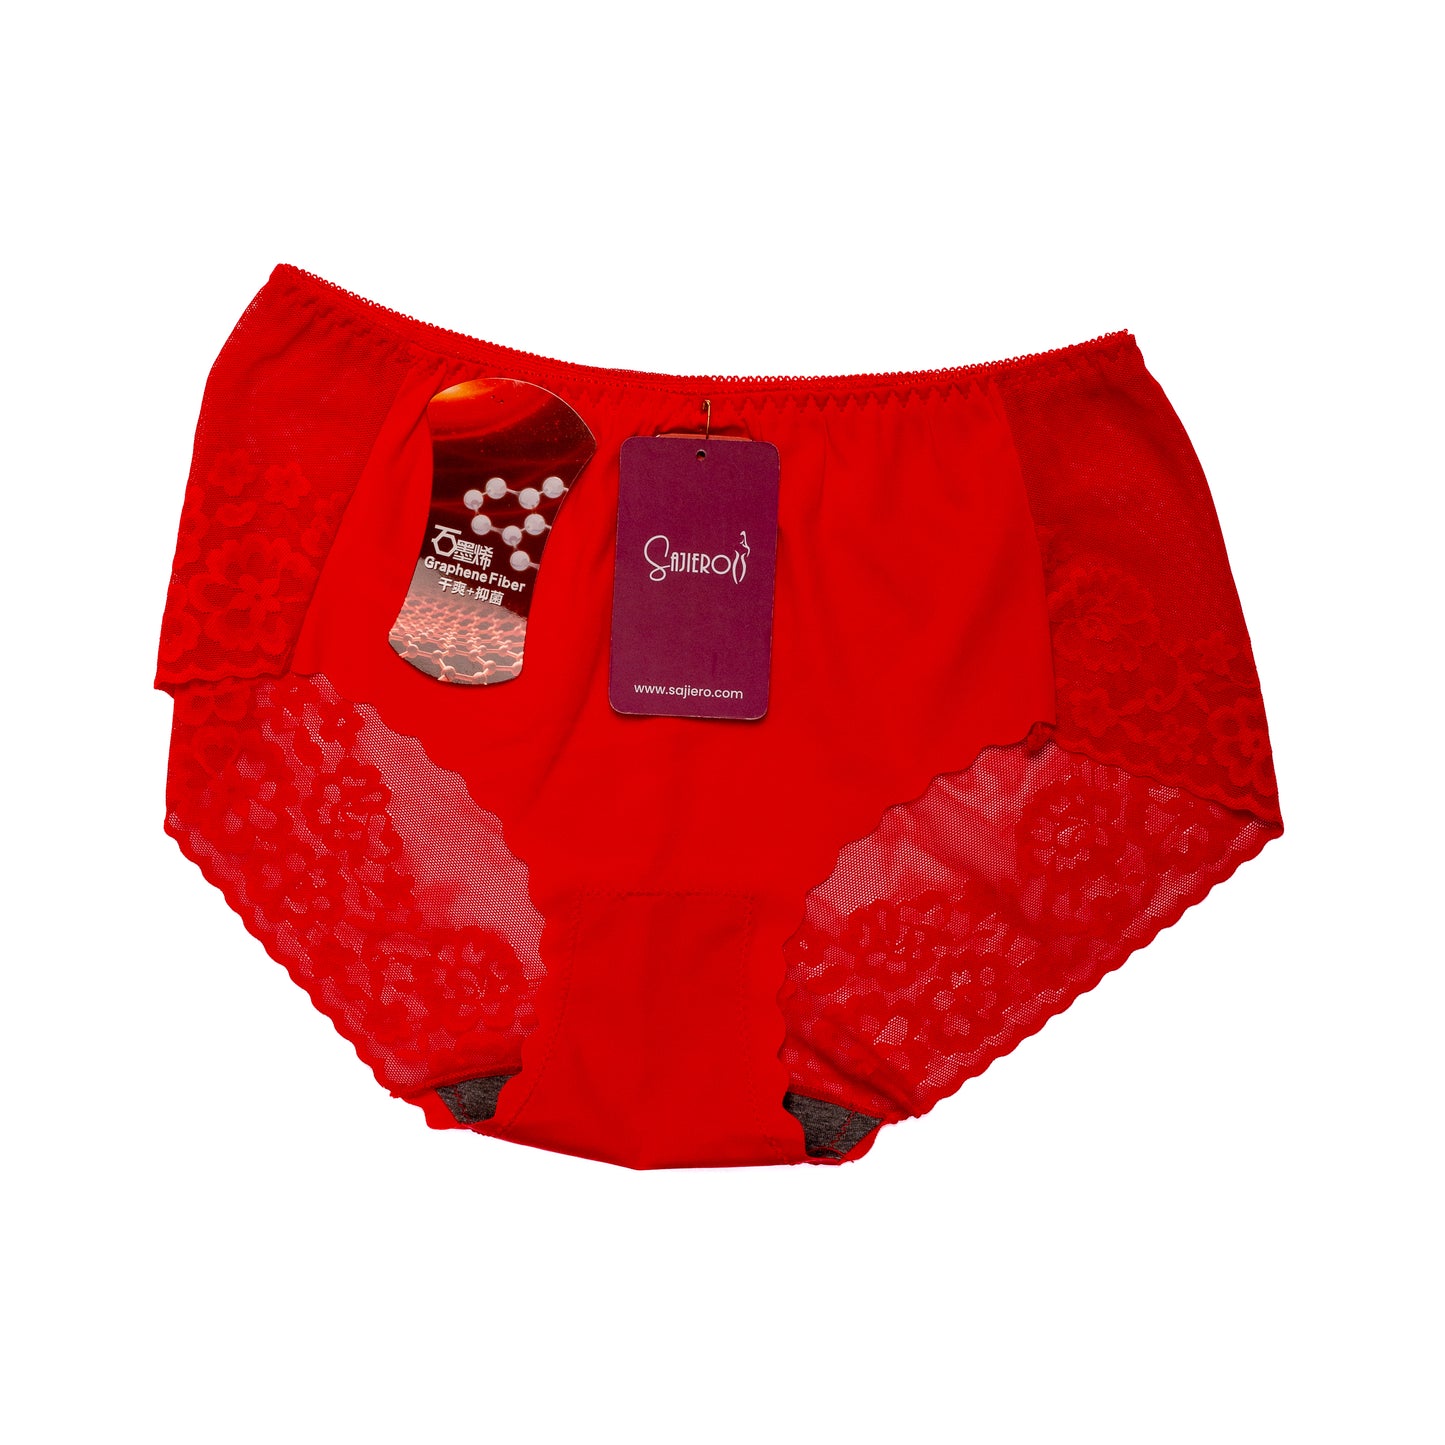 Cosmos Embroidery Net Panty